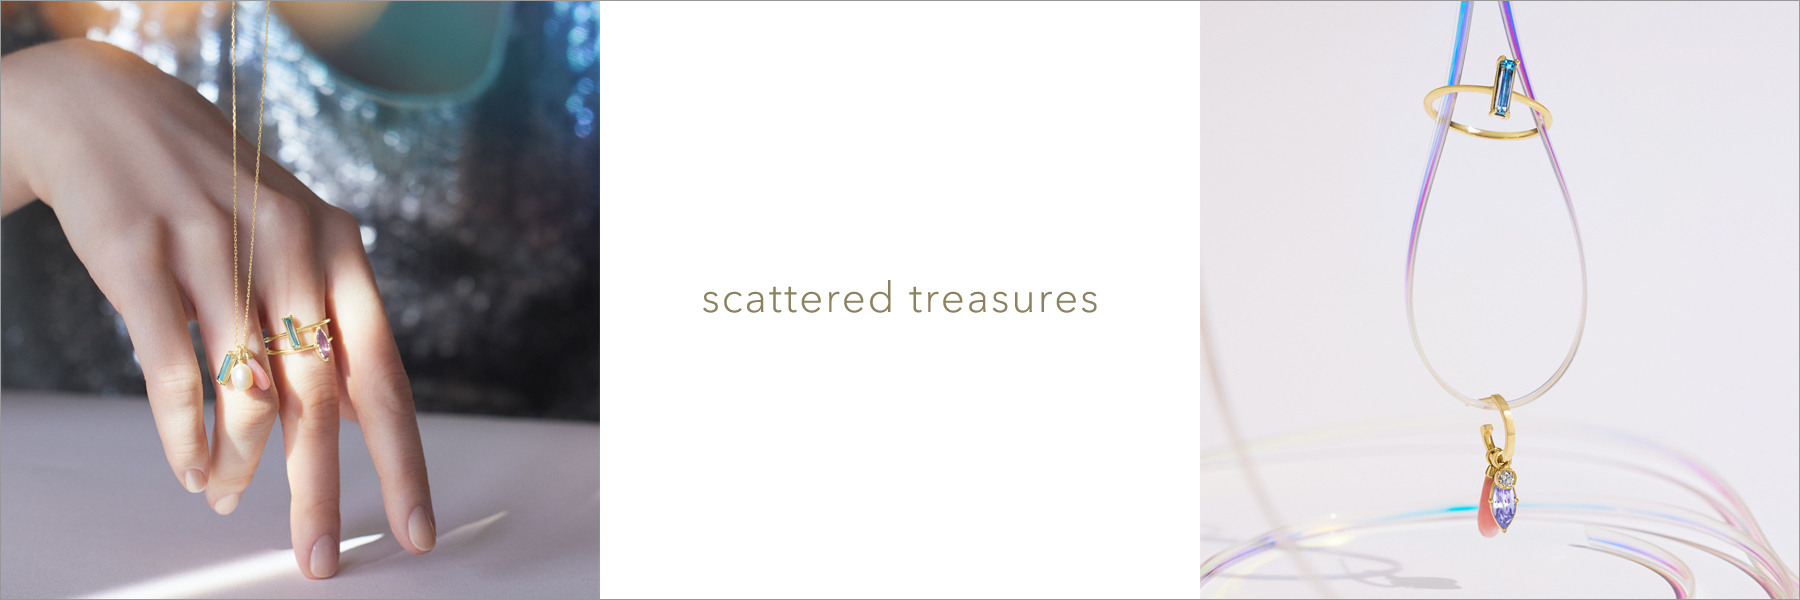 scattered_treasures